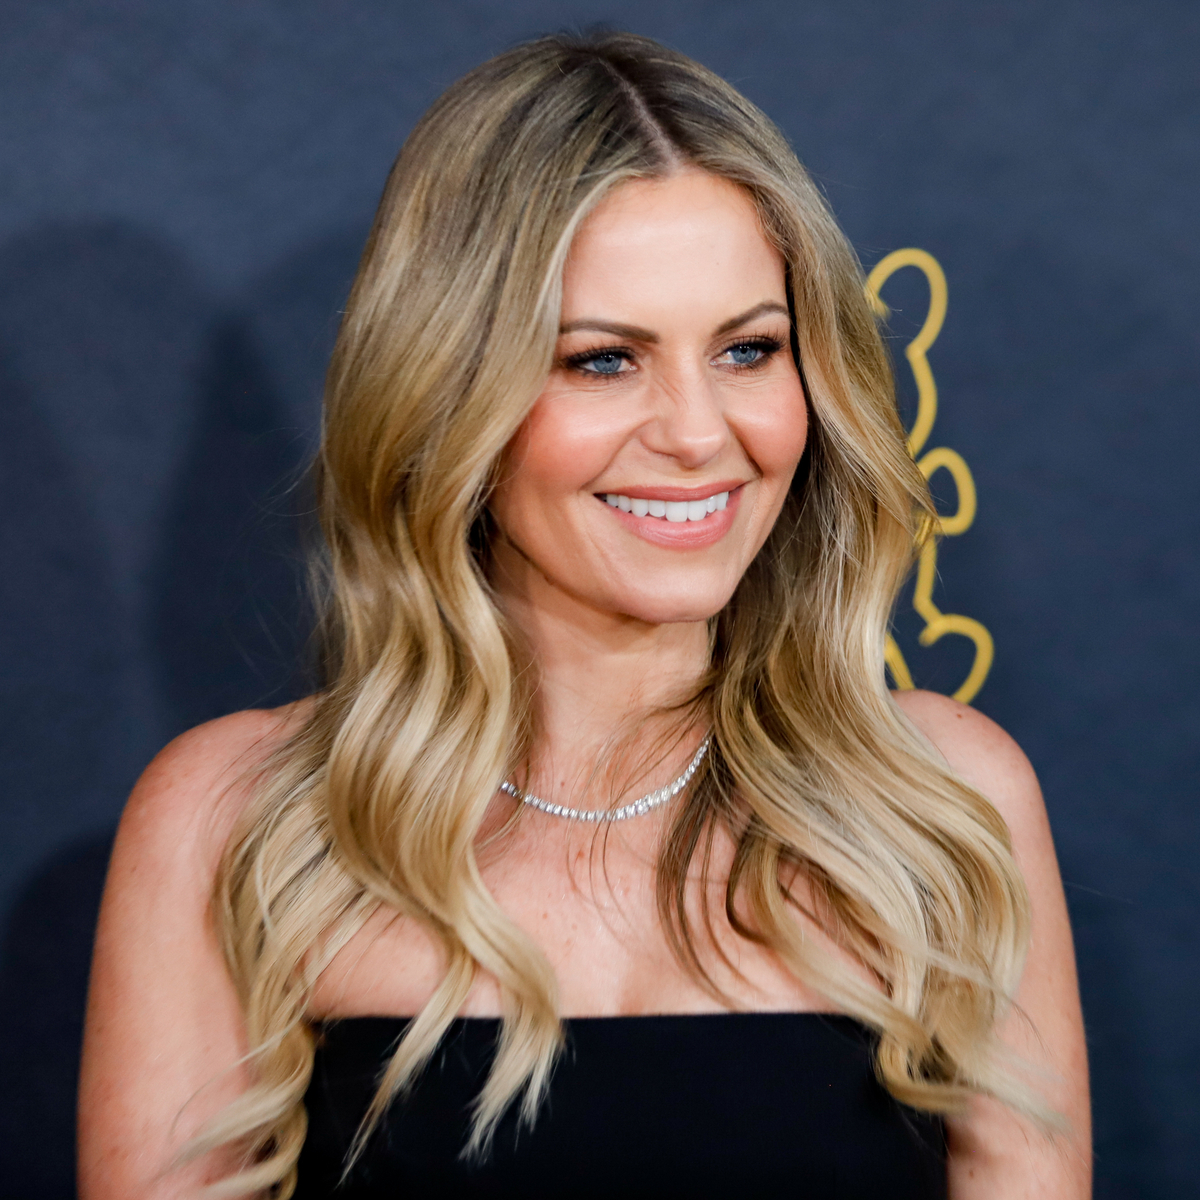 These Facts About Candace Cameron Bure Won't Fill Your House but They'll Expand Your Mind